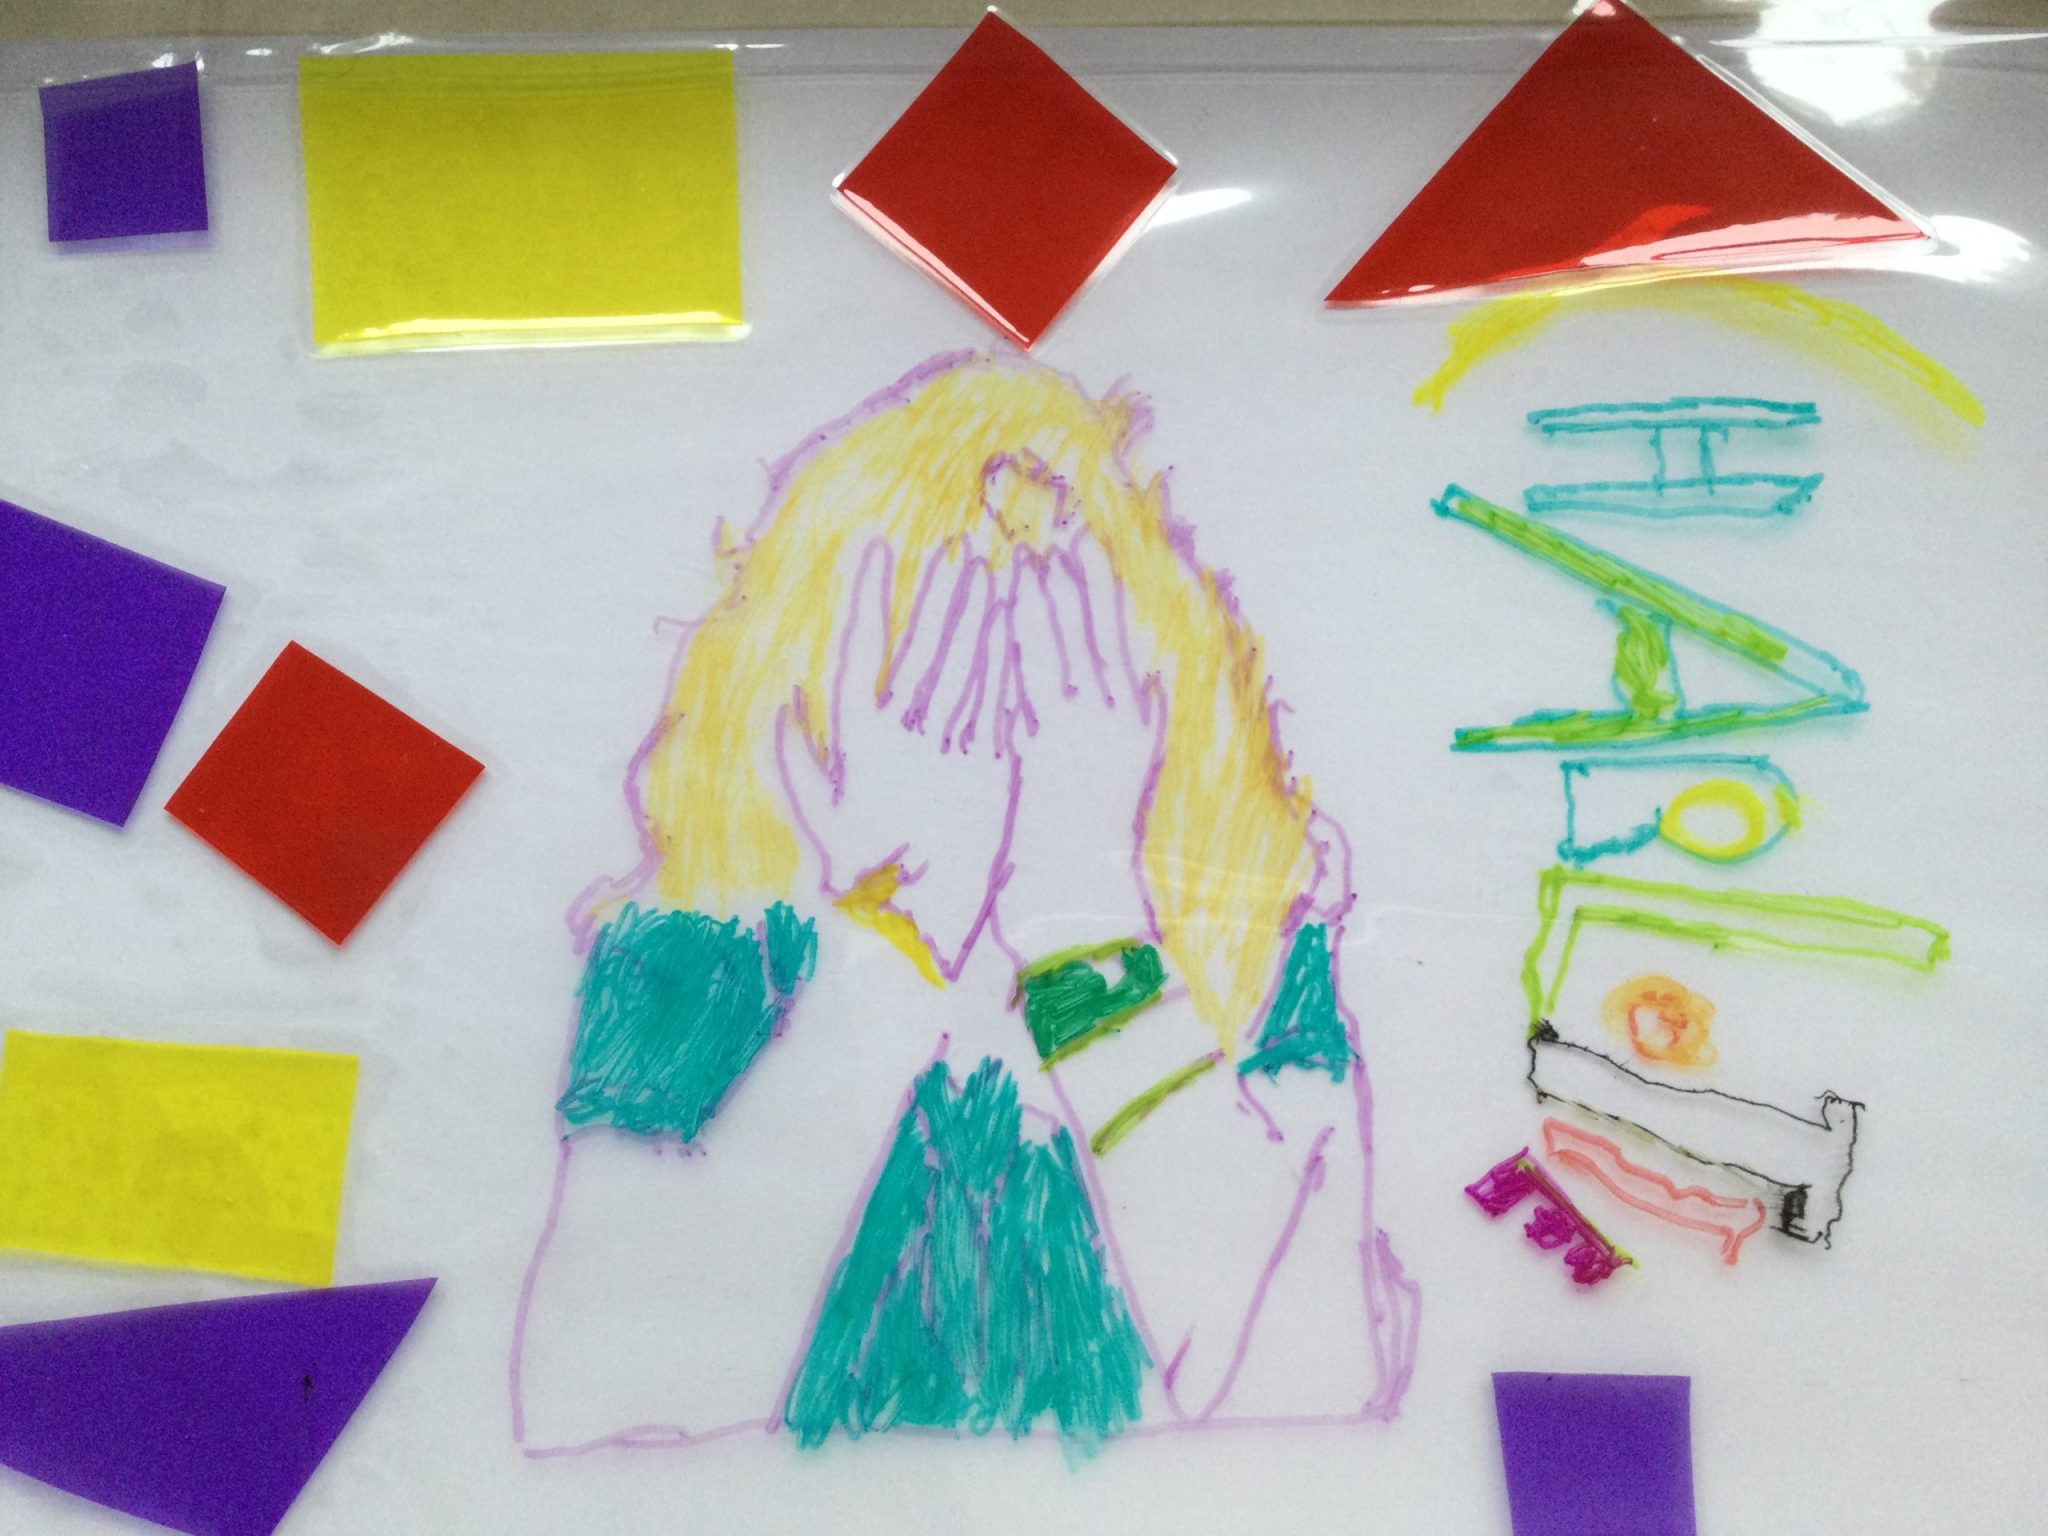 A colourful picture of a child's face, drawn on acetate